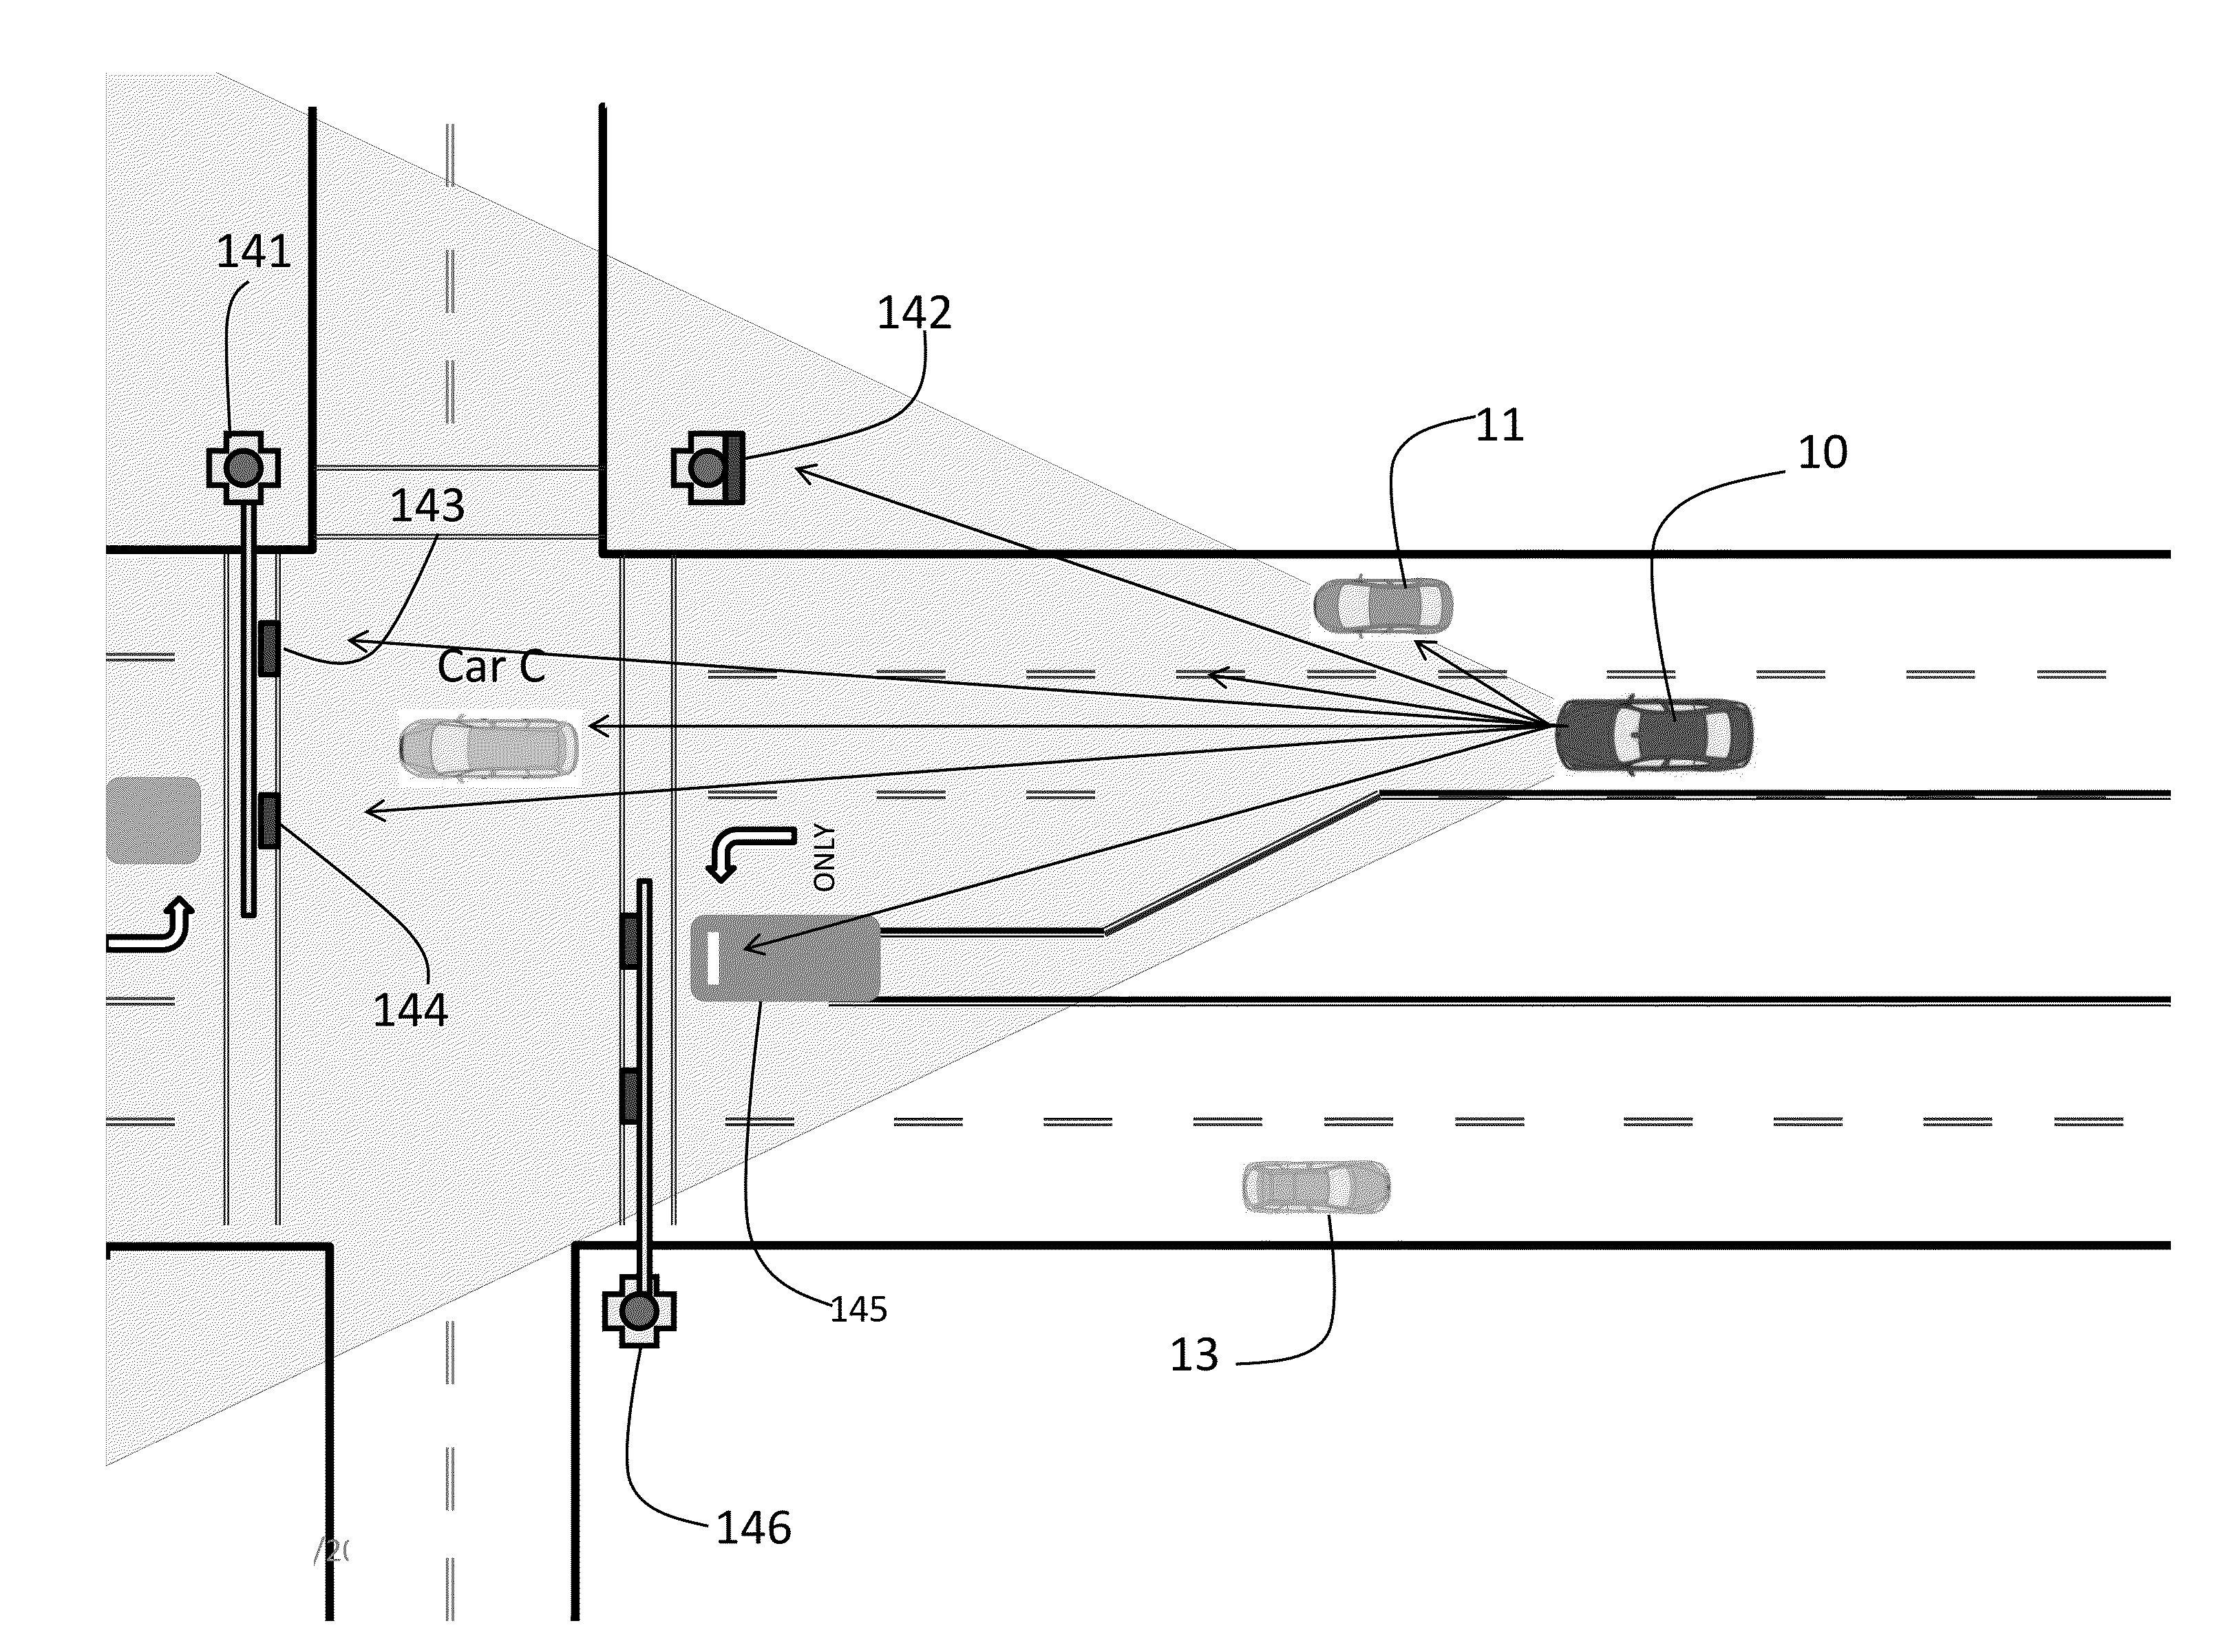 Apparatus, Systems and Methods for Monitoring Vehicular Activity